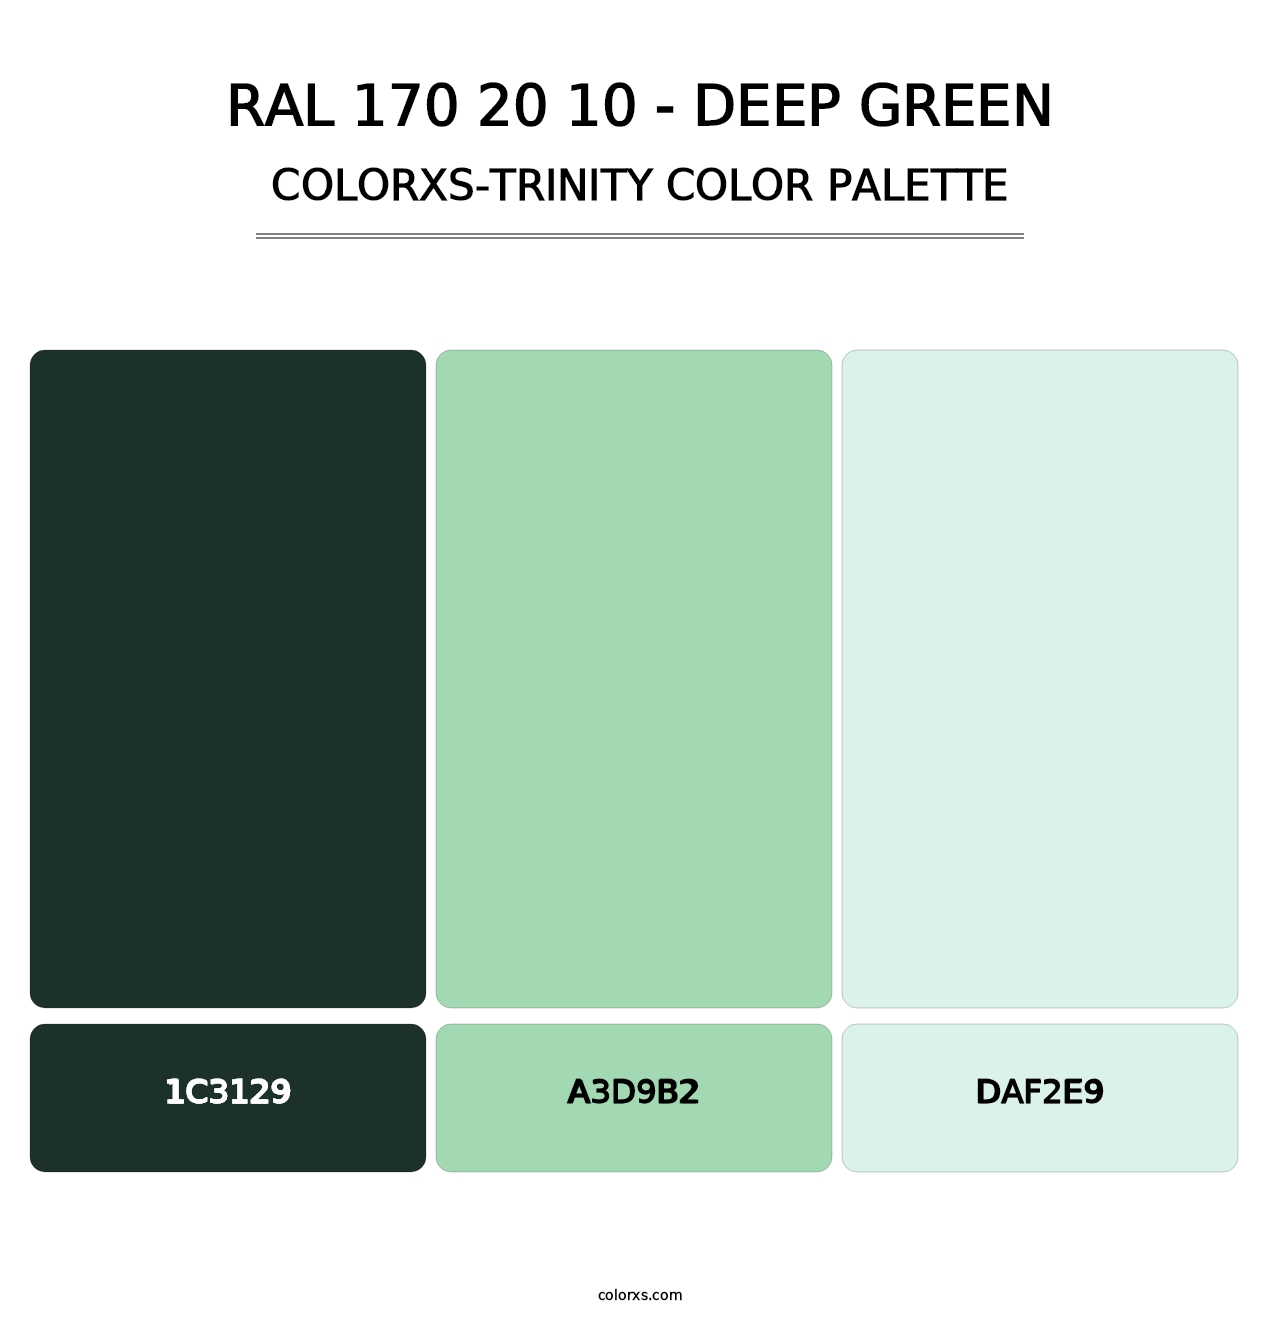 RAL 170 20 10 - Deep Green - Colorxs Trinity Palette